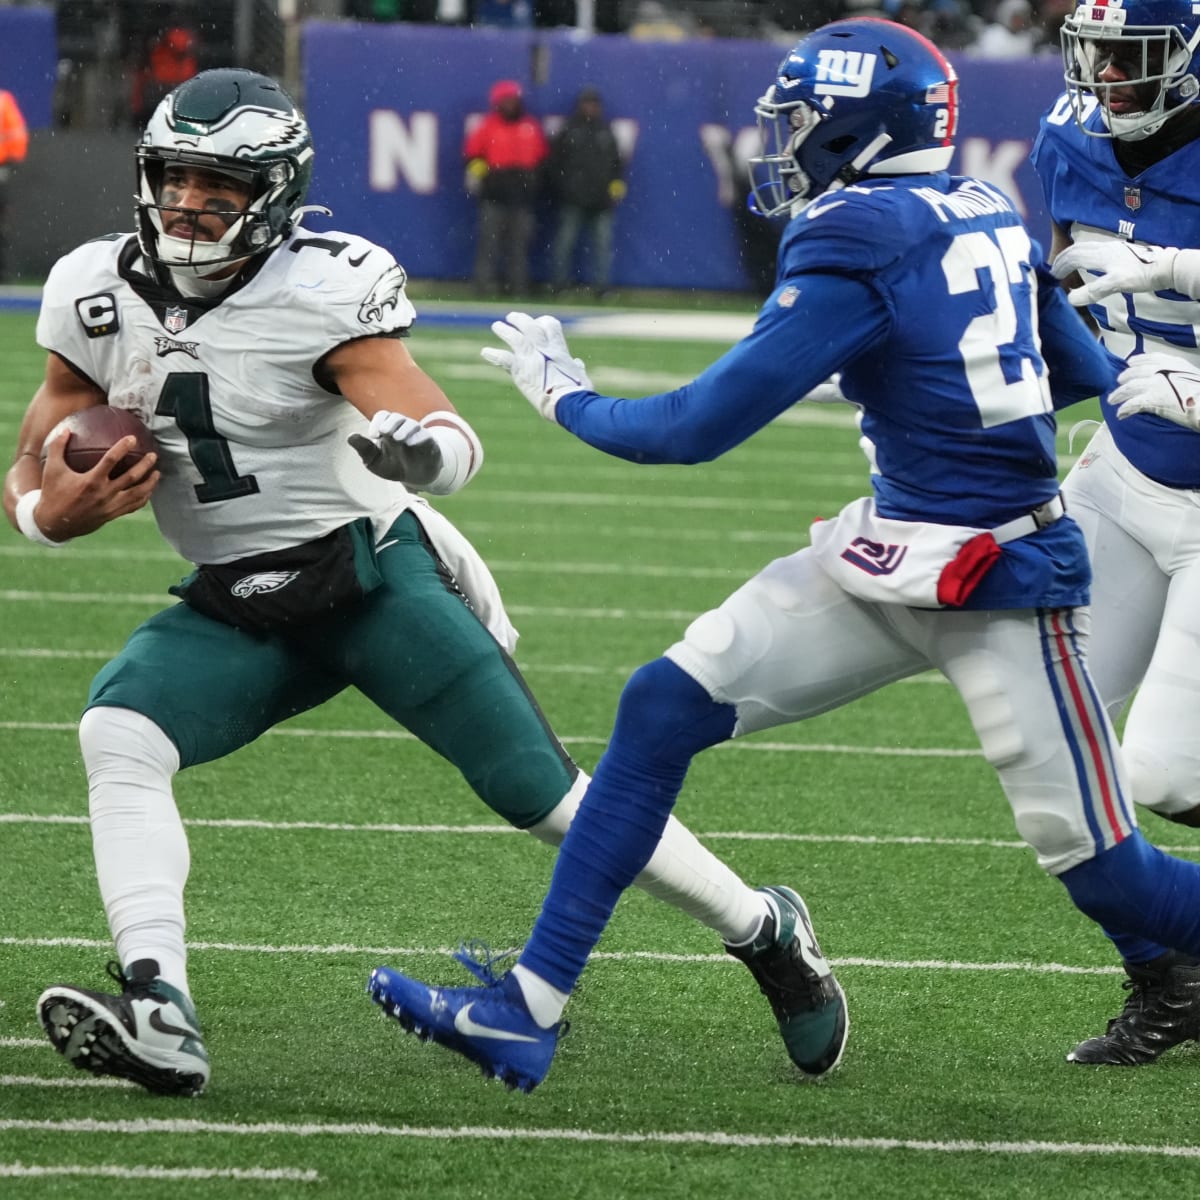 Eagles vs. Cowboys live stream: TV channel, how to watch